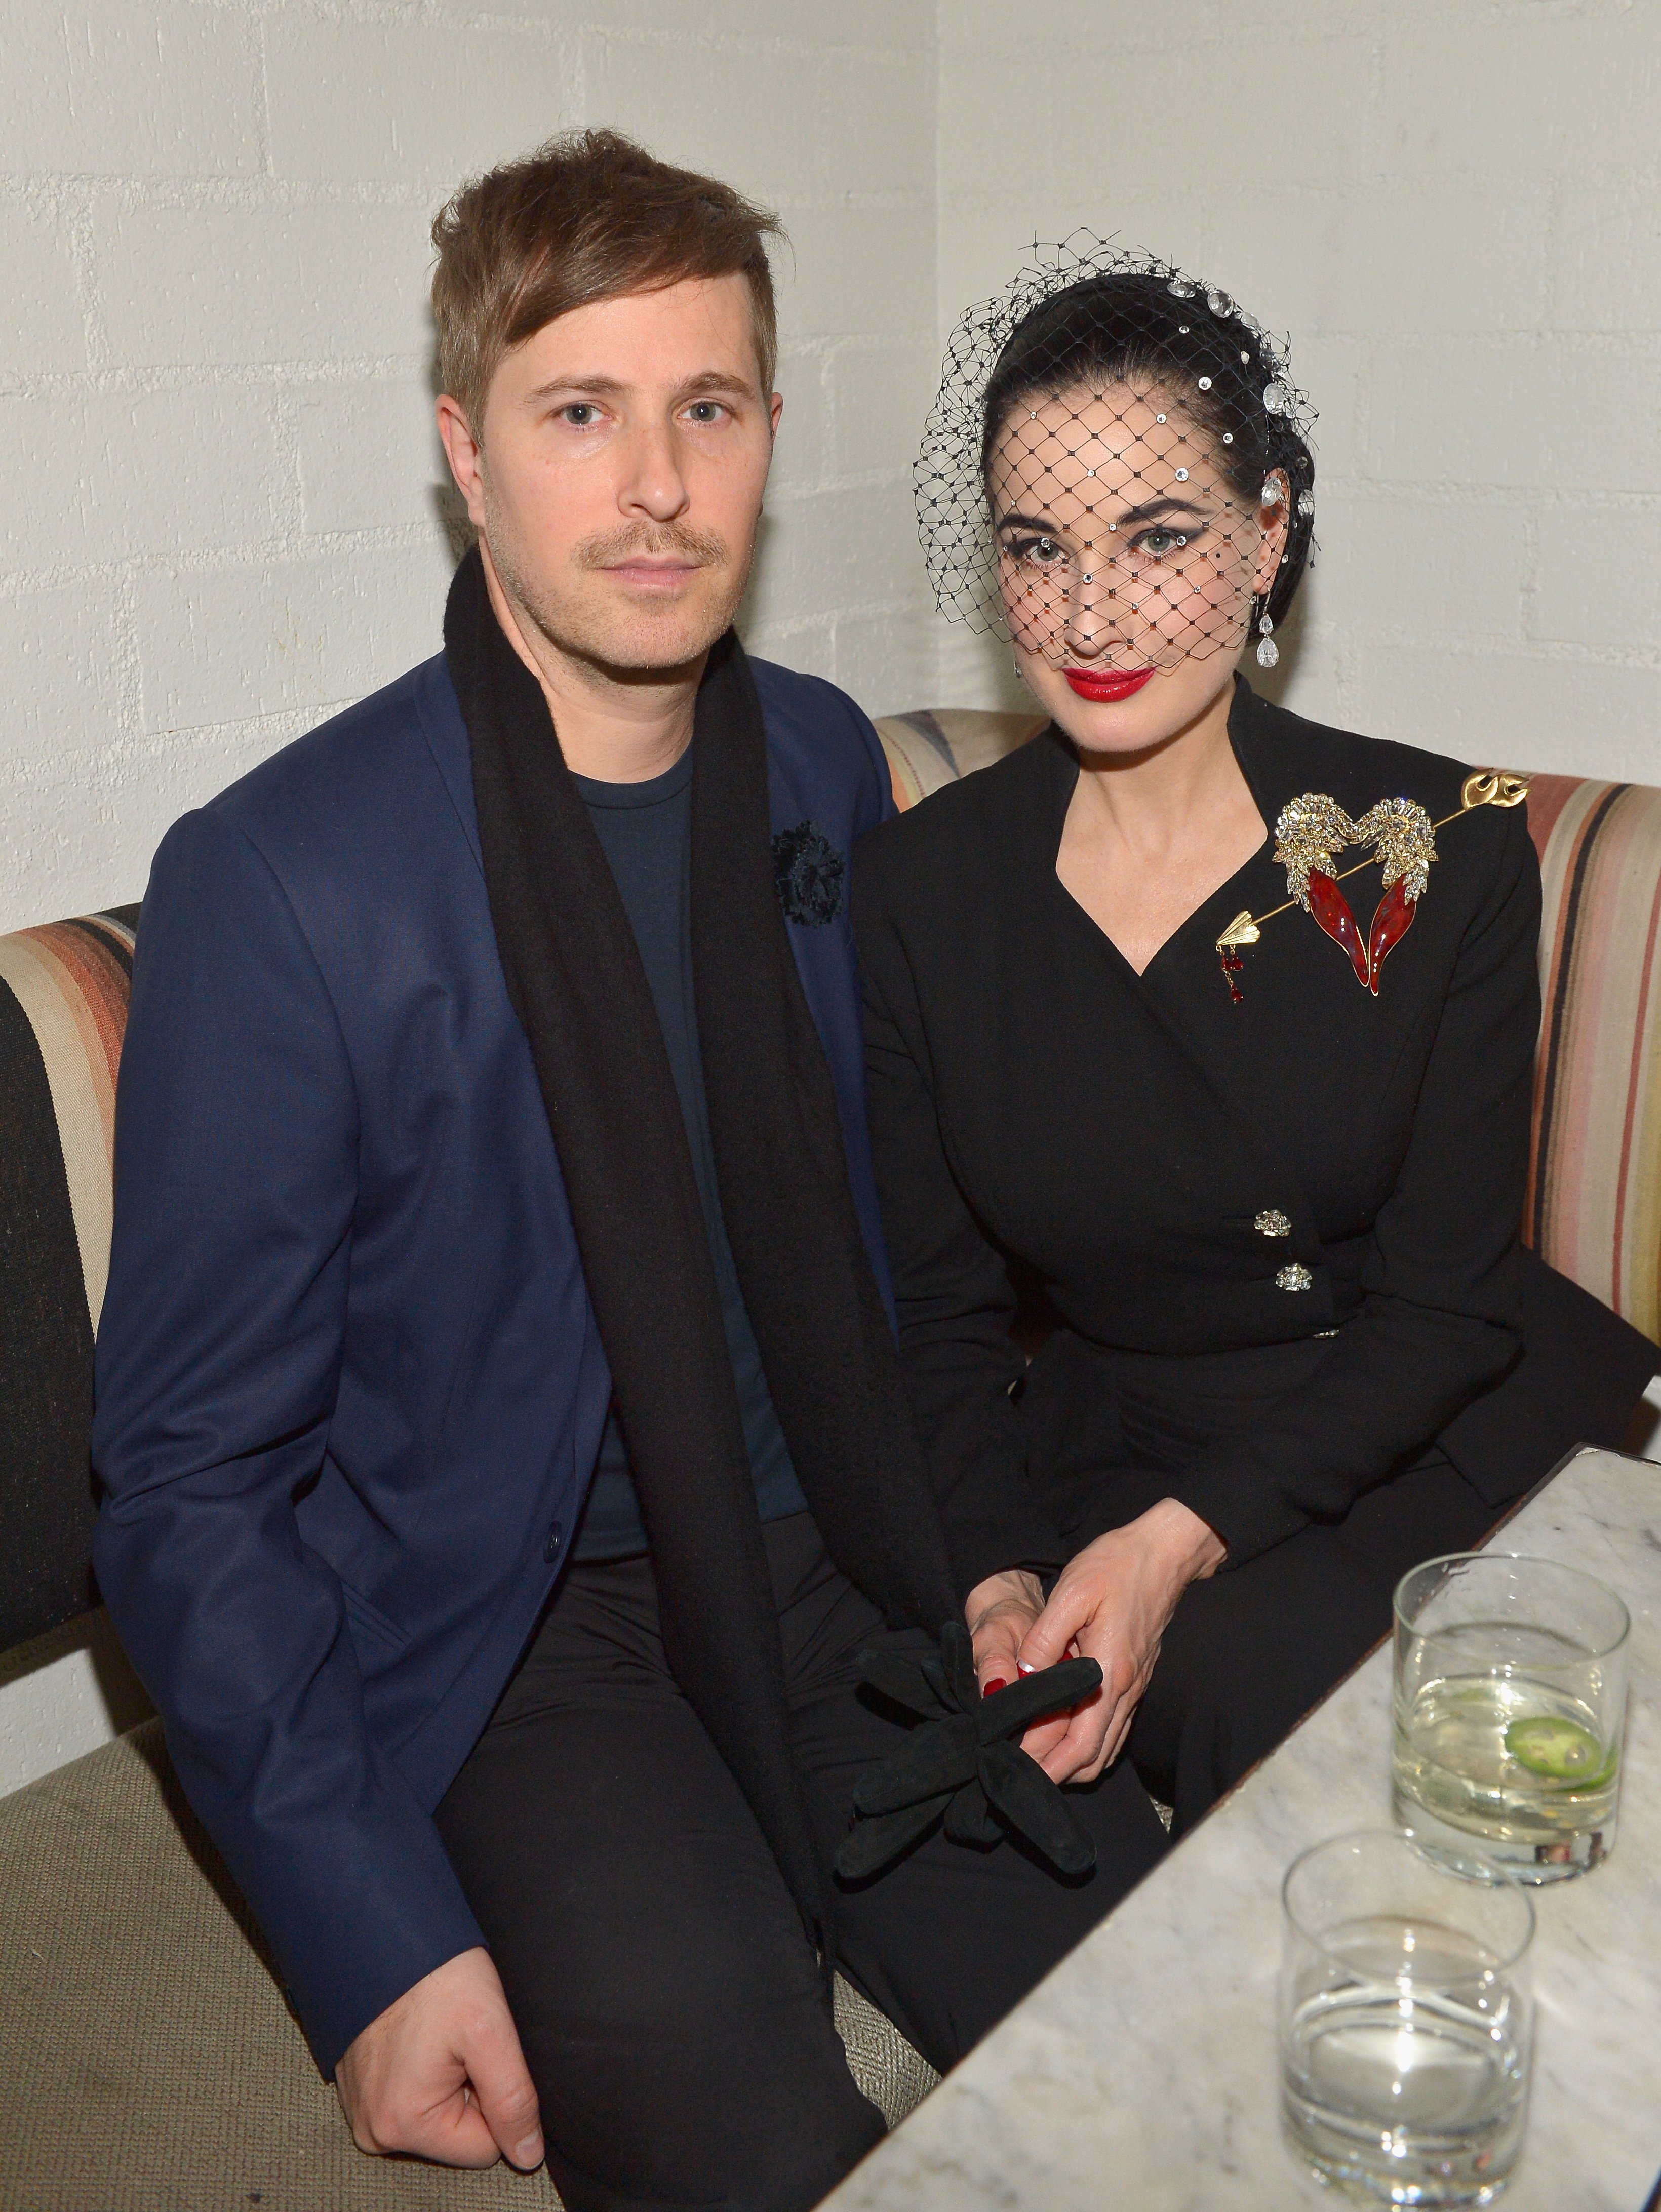 Dita Von Teese and Adam Rajcevich at the launch of Frieze LA on February 13, 2019 | Source: Getty Images